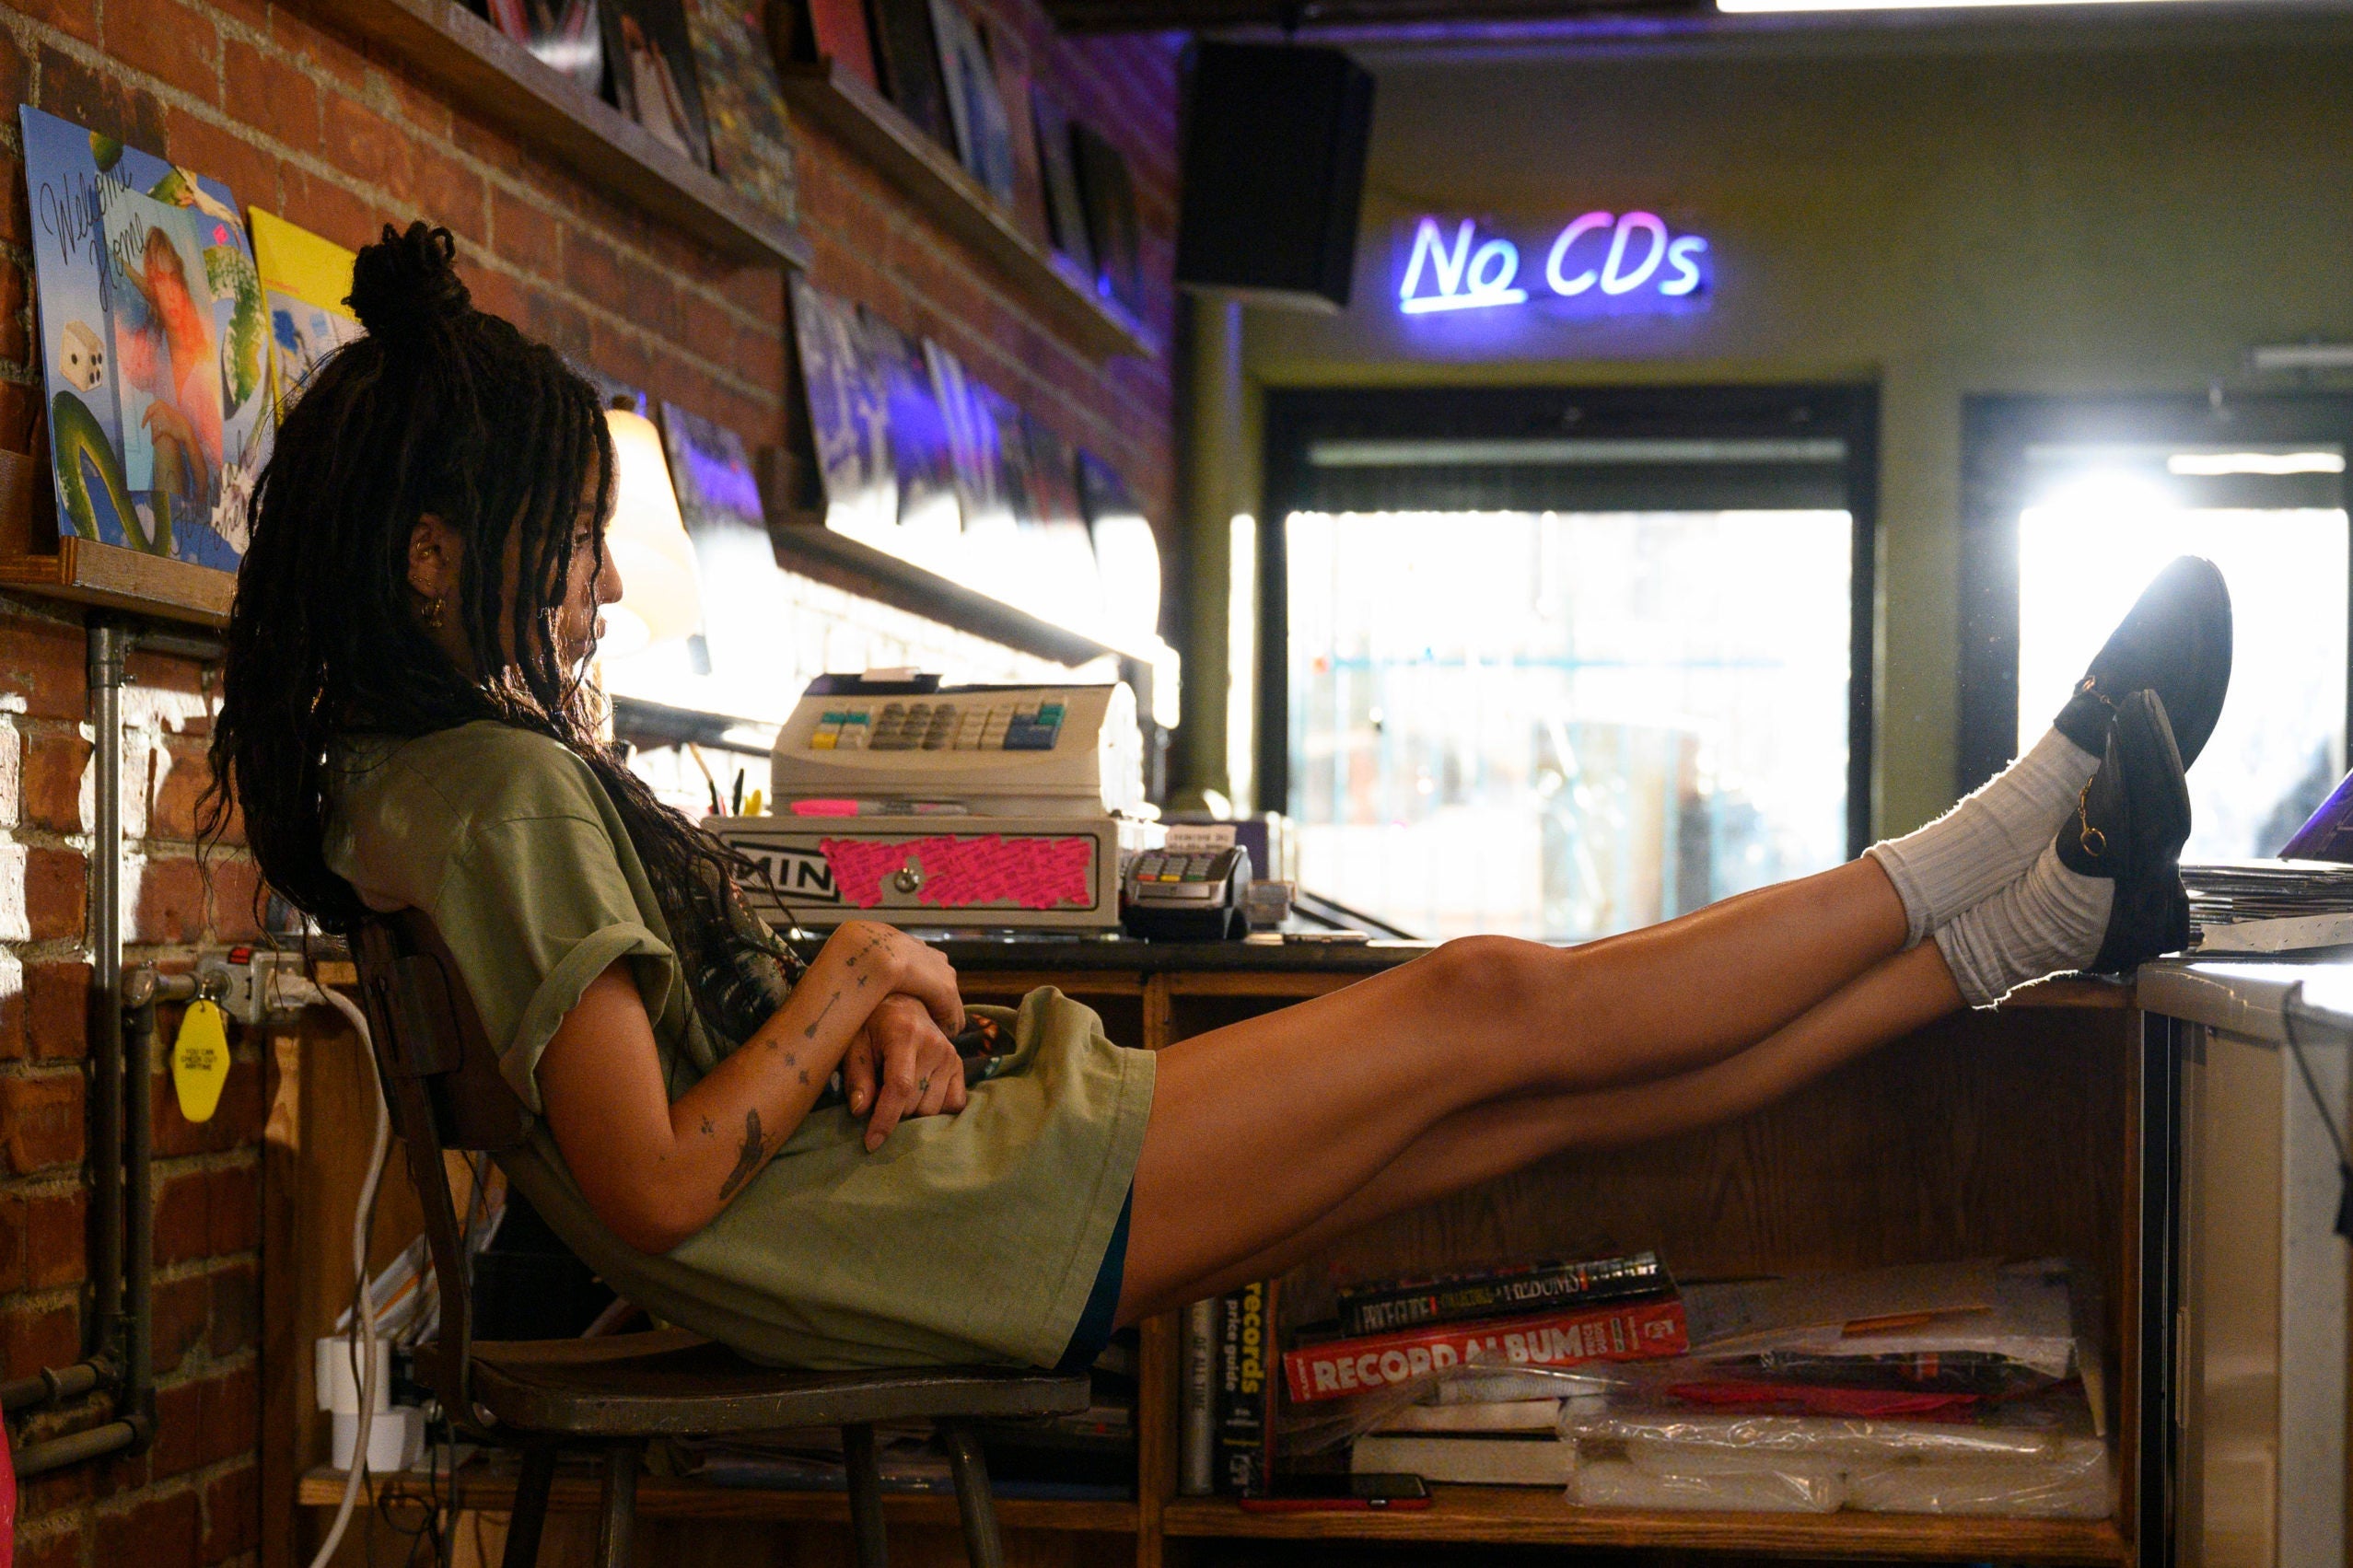 Zoë Kravitz in a scene from High Fidelity, in which she sits at a cash register while a "No CDs" neon sign blares in the background.